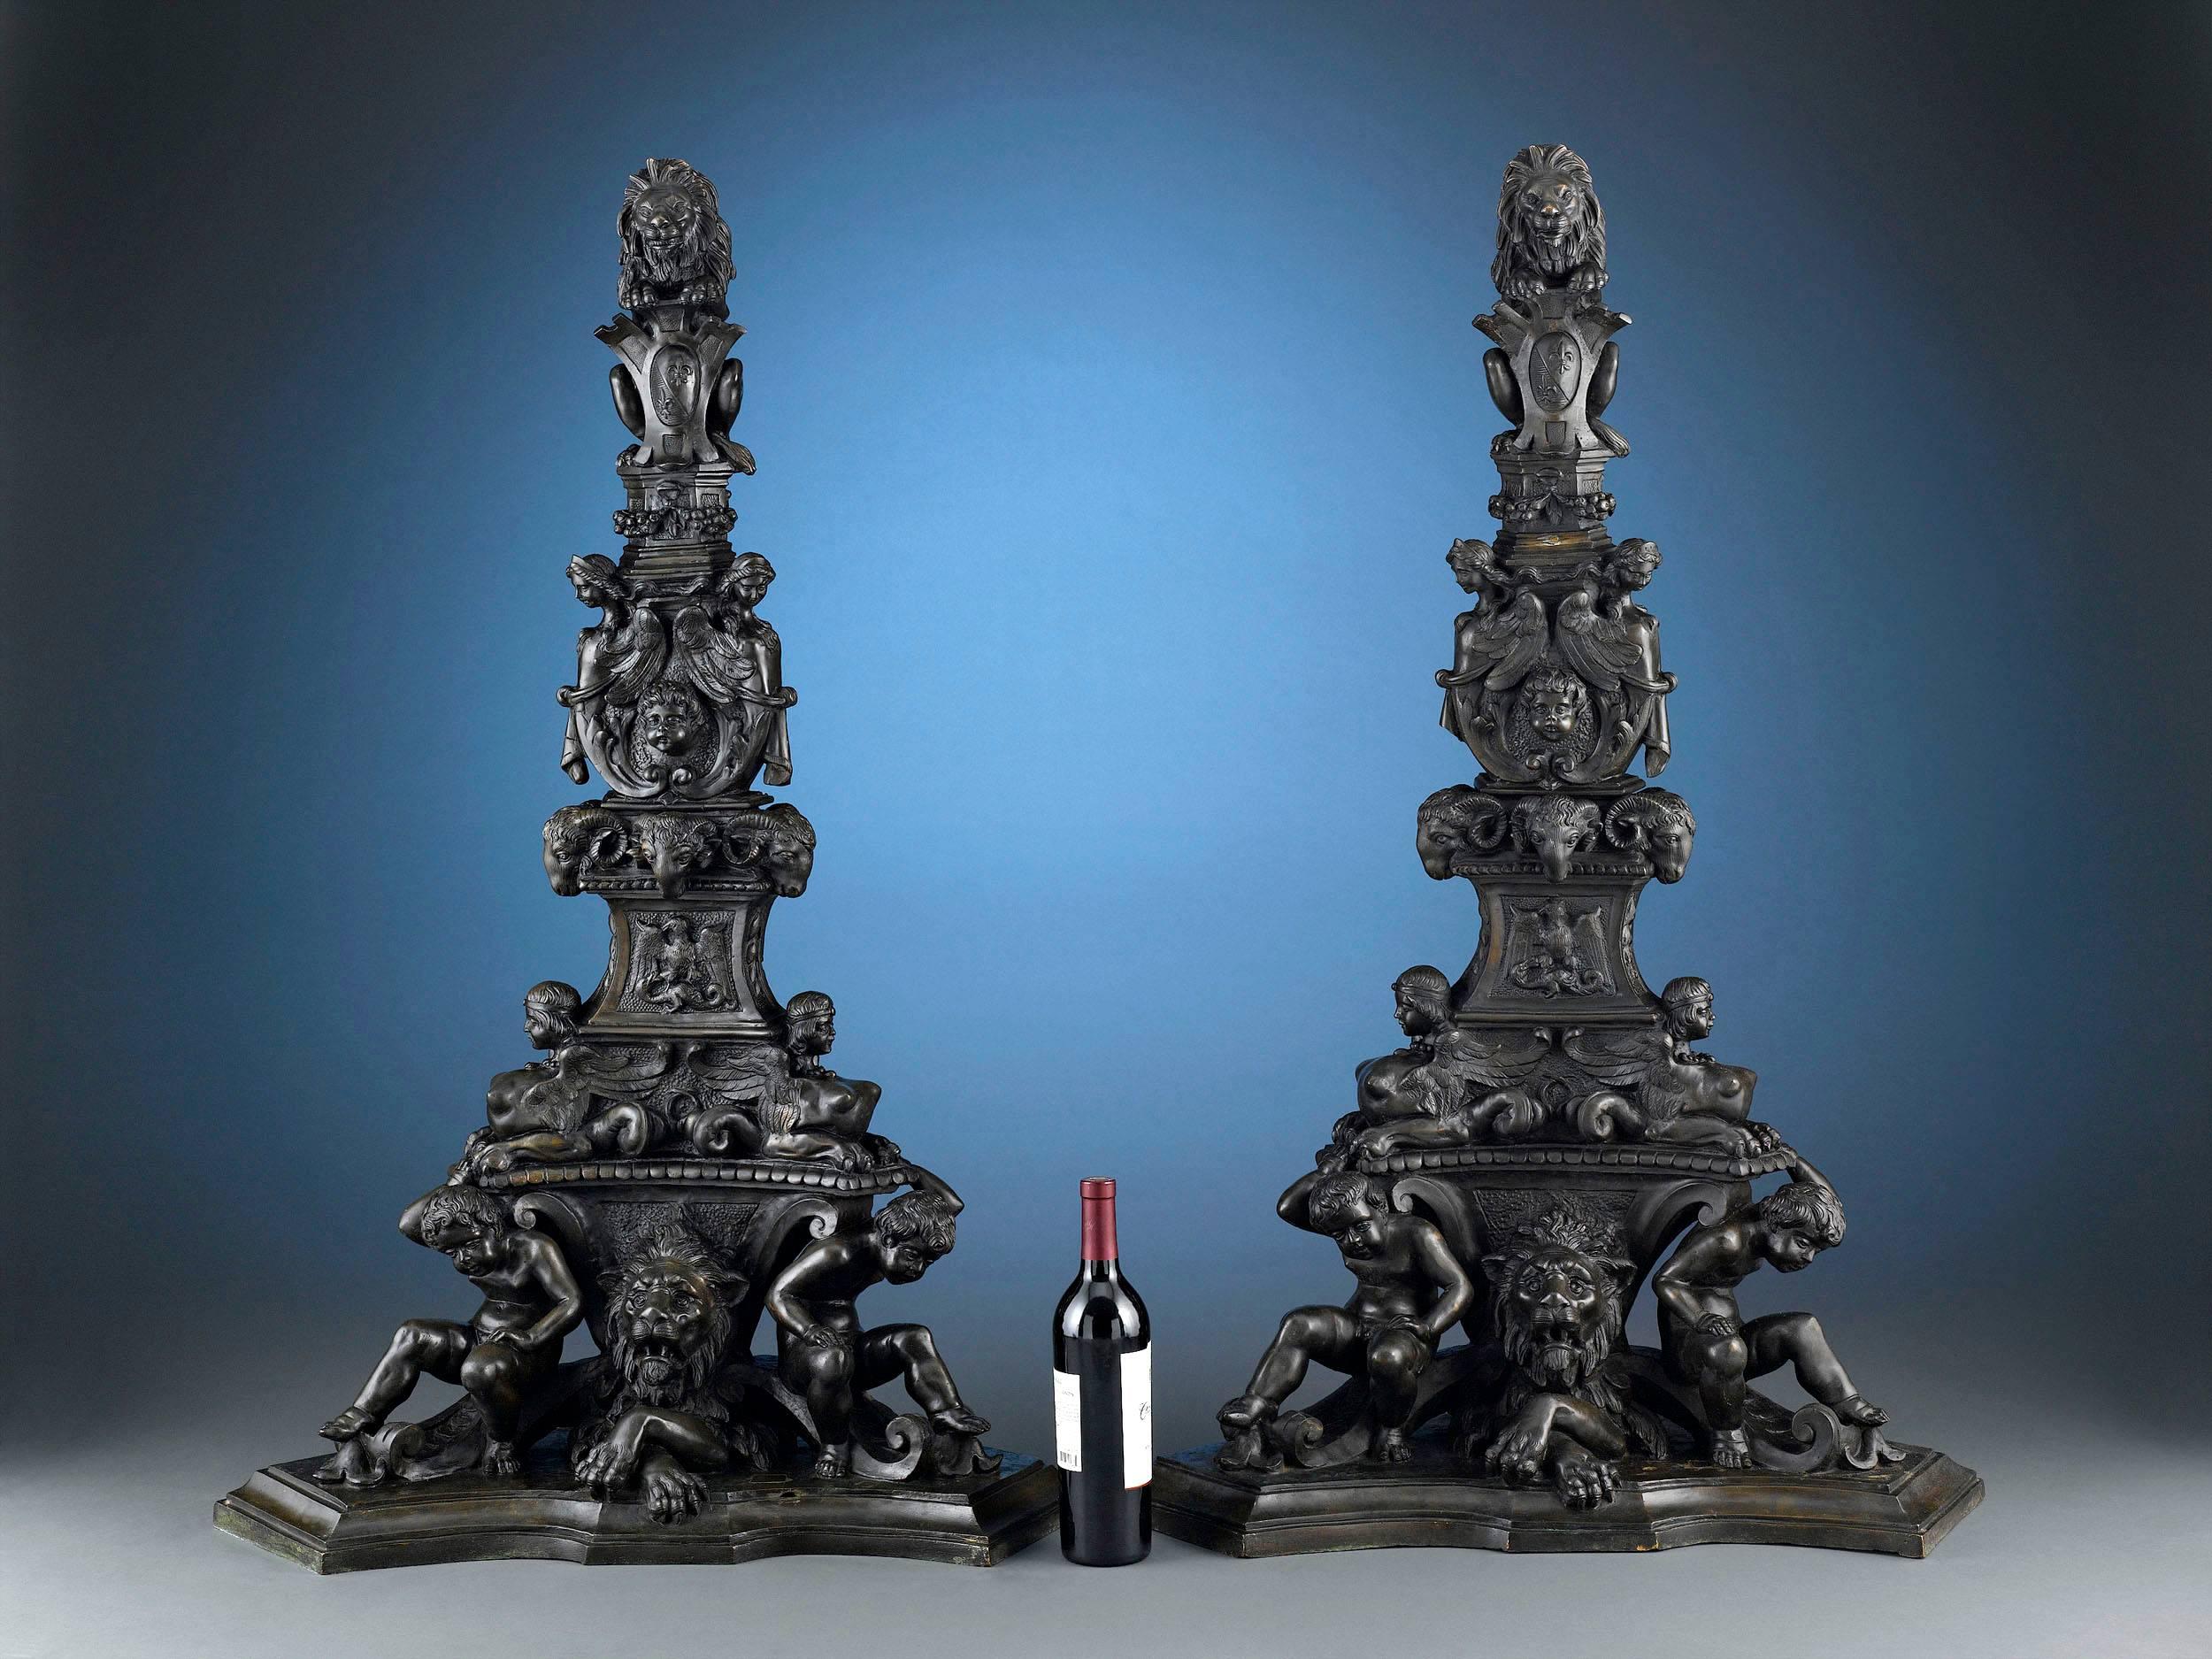 This monumental pair of Italian bronze andirons is among the most intriguing and heavily decorated we have ever seen. Standing 45 inches tall, the andirons exhibit sculptural work of tremendous detail and symbolism. The figures represented include